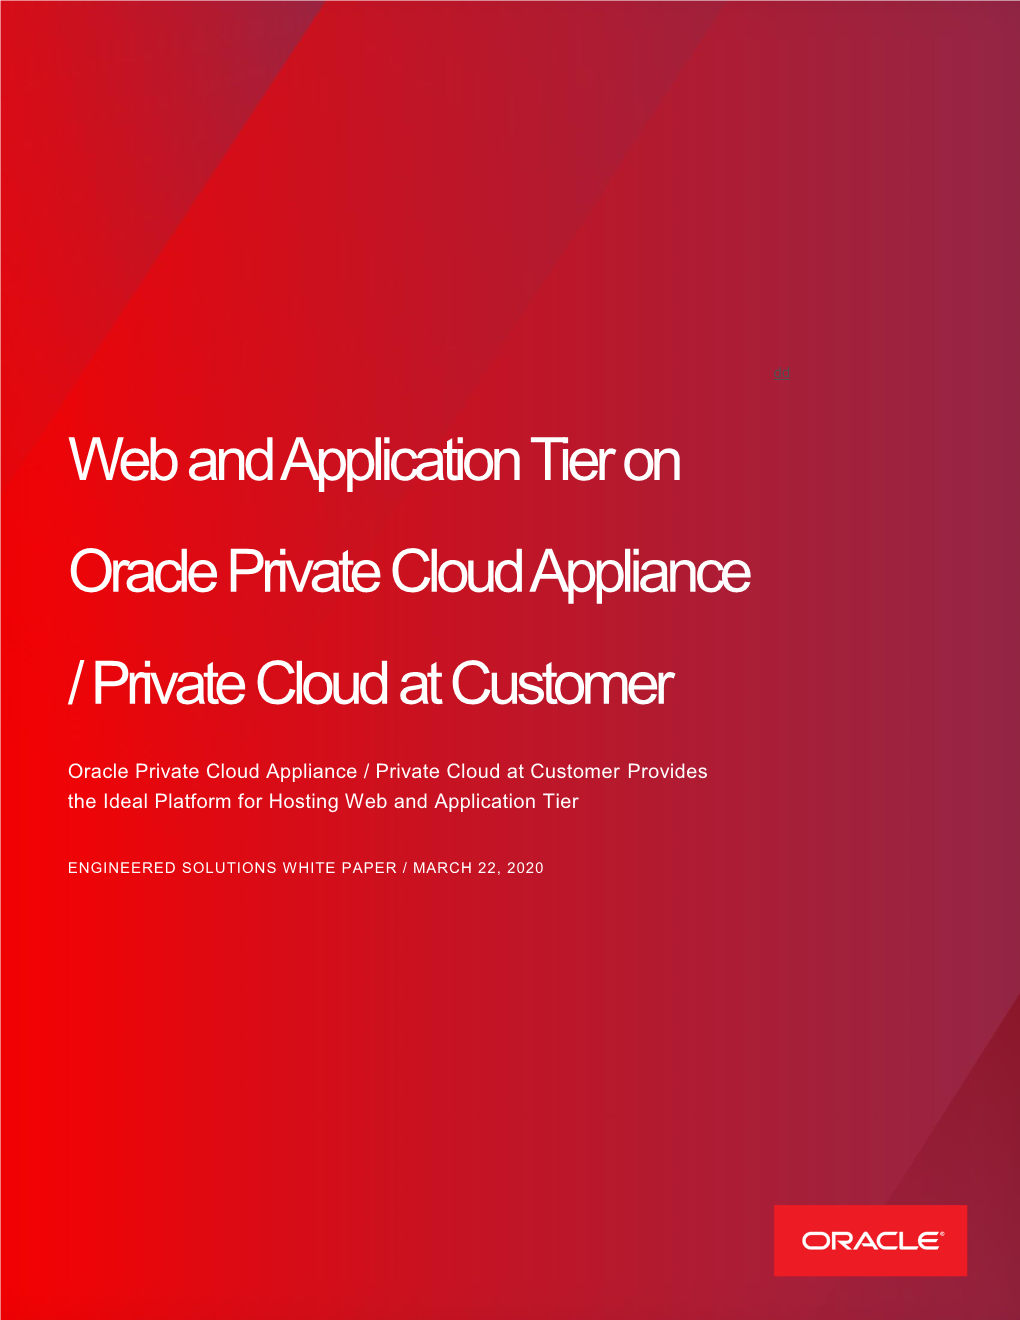 Deploy Web and Application Tier on Oracle Private Cloud Appliance And